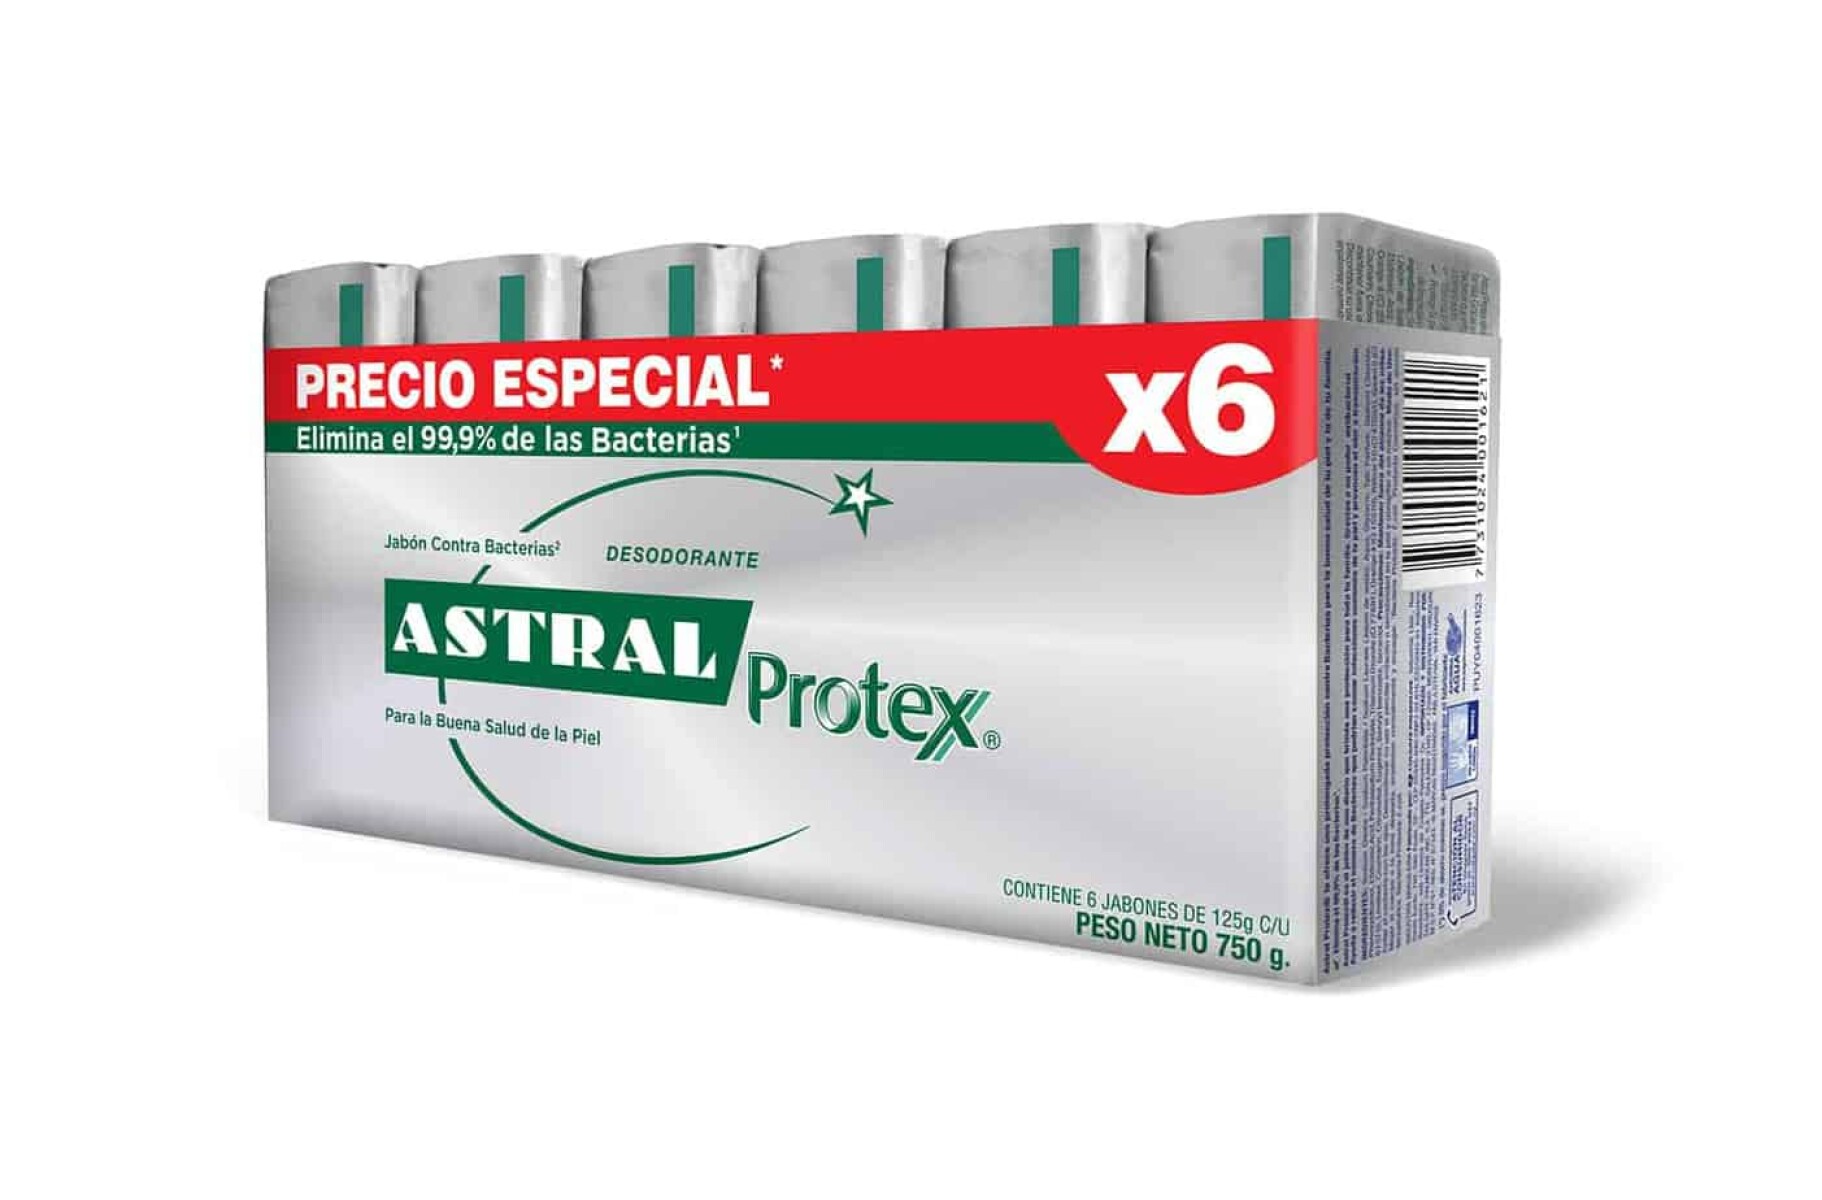 Astral Plata Pack 6X4 125 Grs 